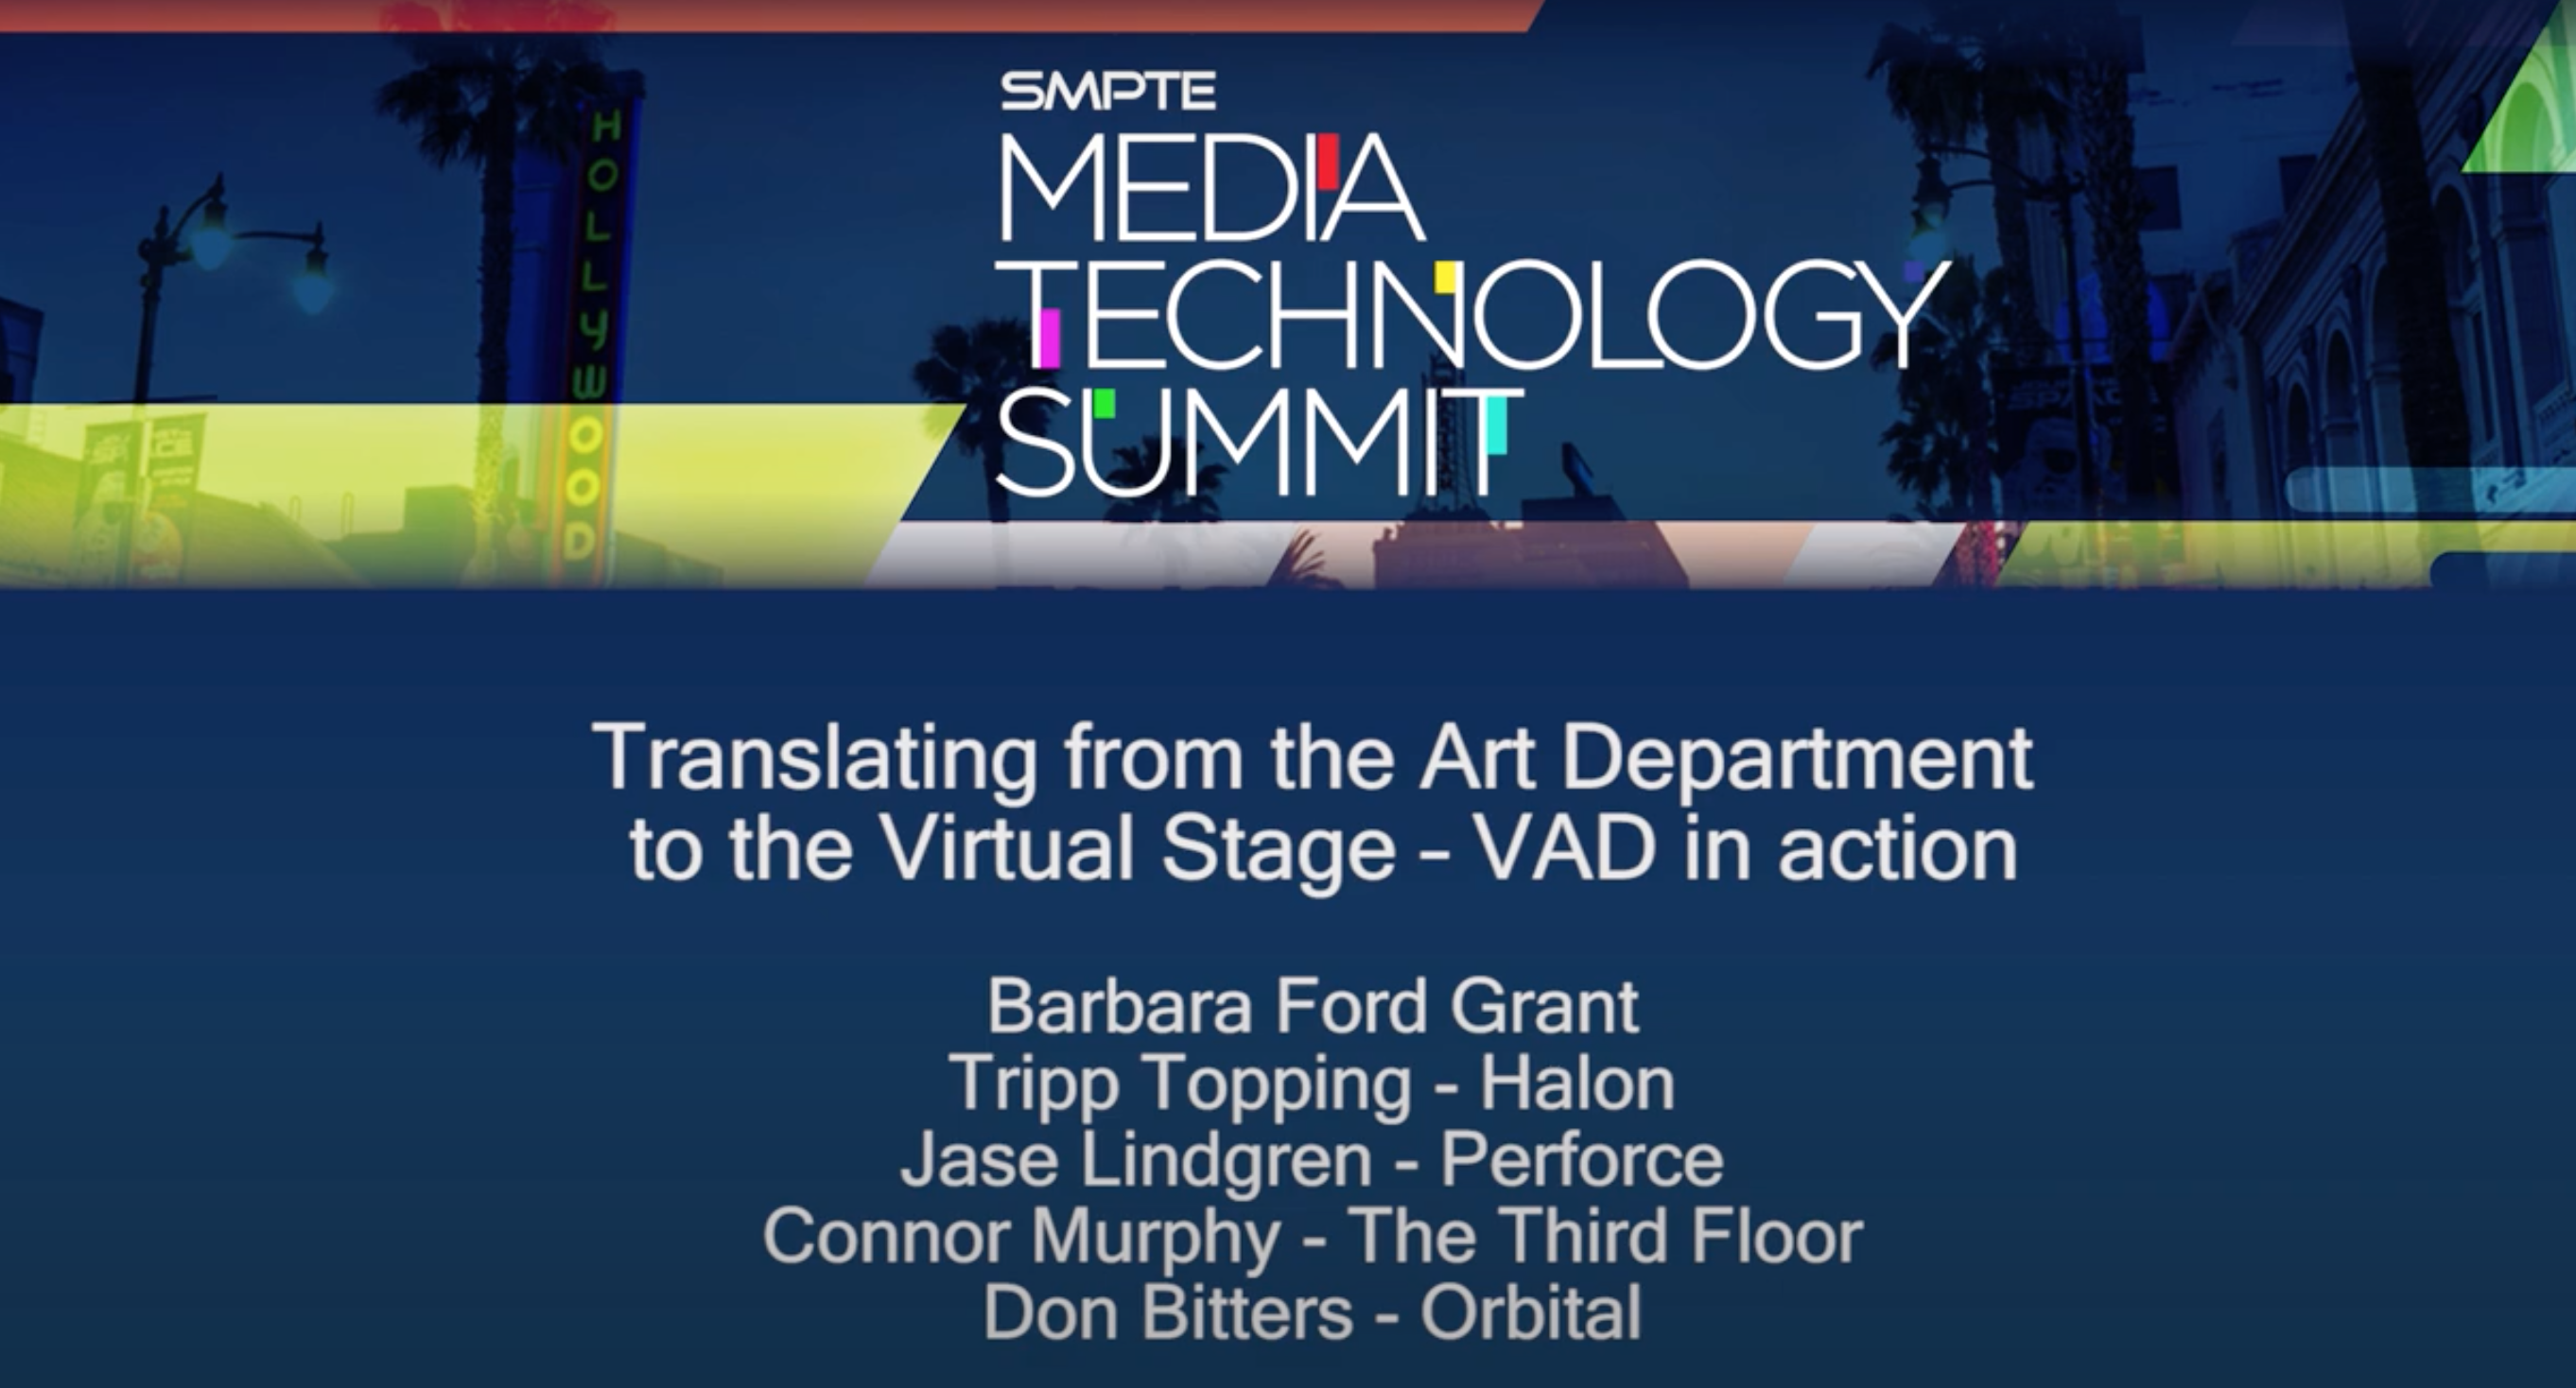 Translating from the Art Department to the Virtual Stage - VAD in action